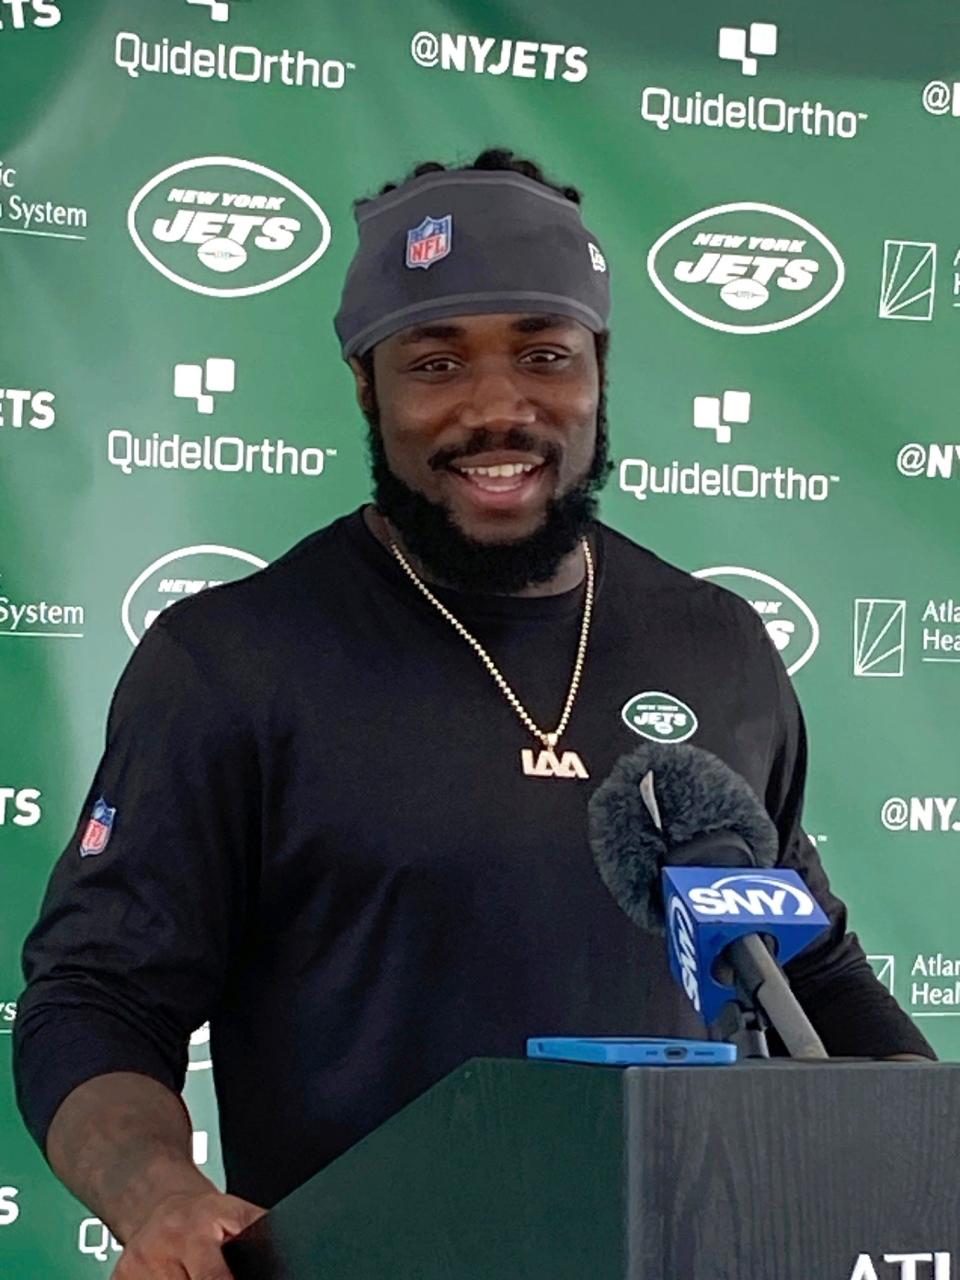 August 17, 2023: New York Jets running back Dalvin Cook speaks to reporters at the team's facility in Florham Park, N.J. The former Minnesota Vikings star signed a one-year contract with the Jets on Aug. 16.